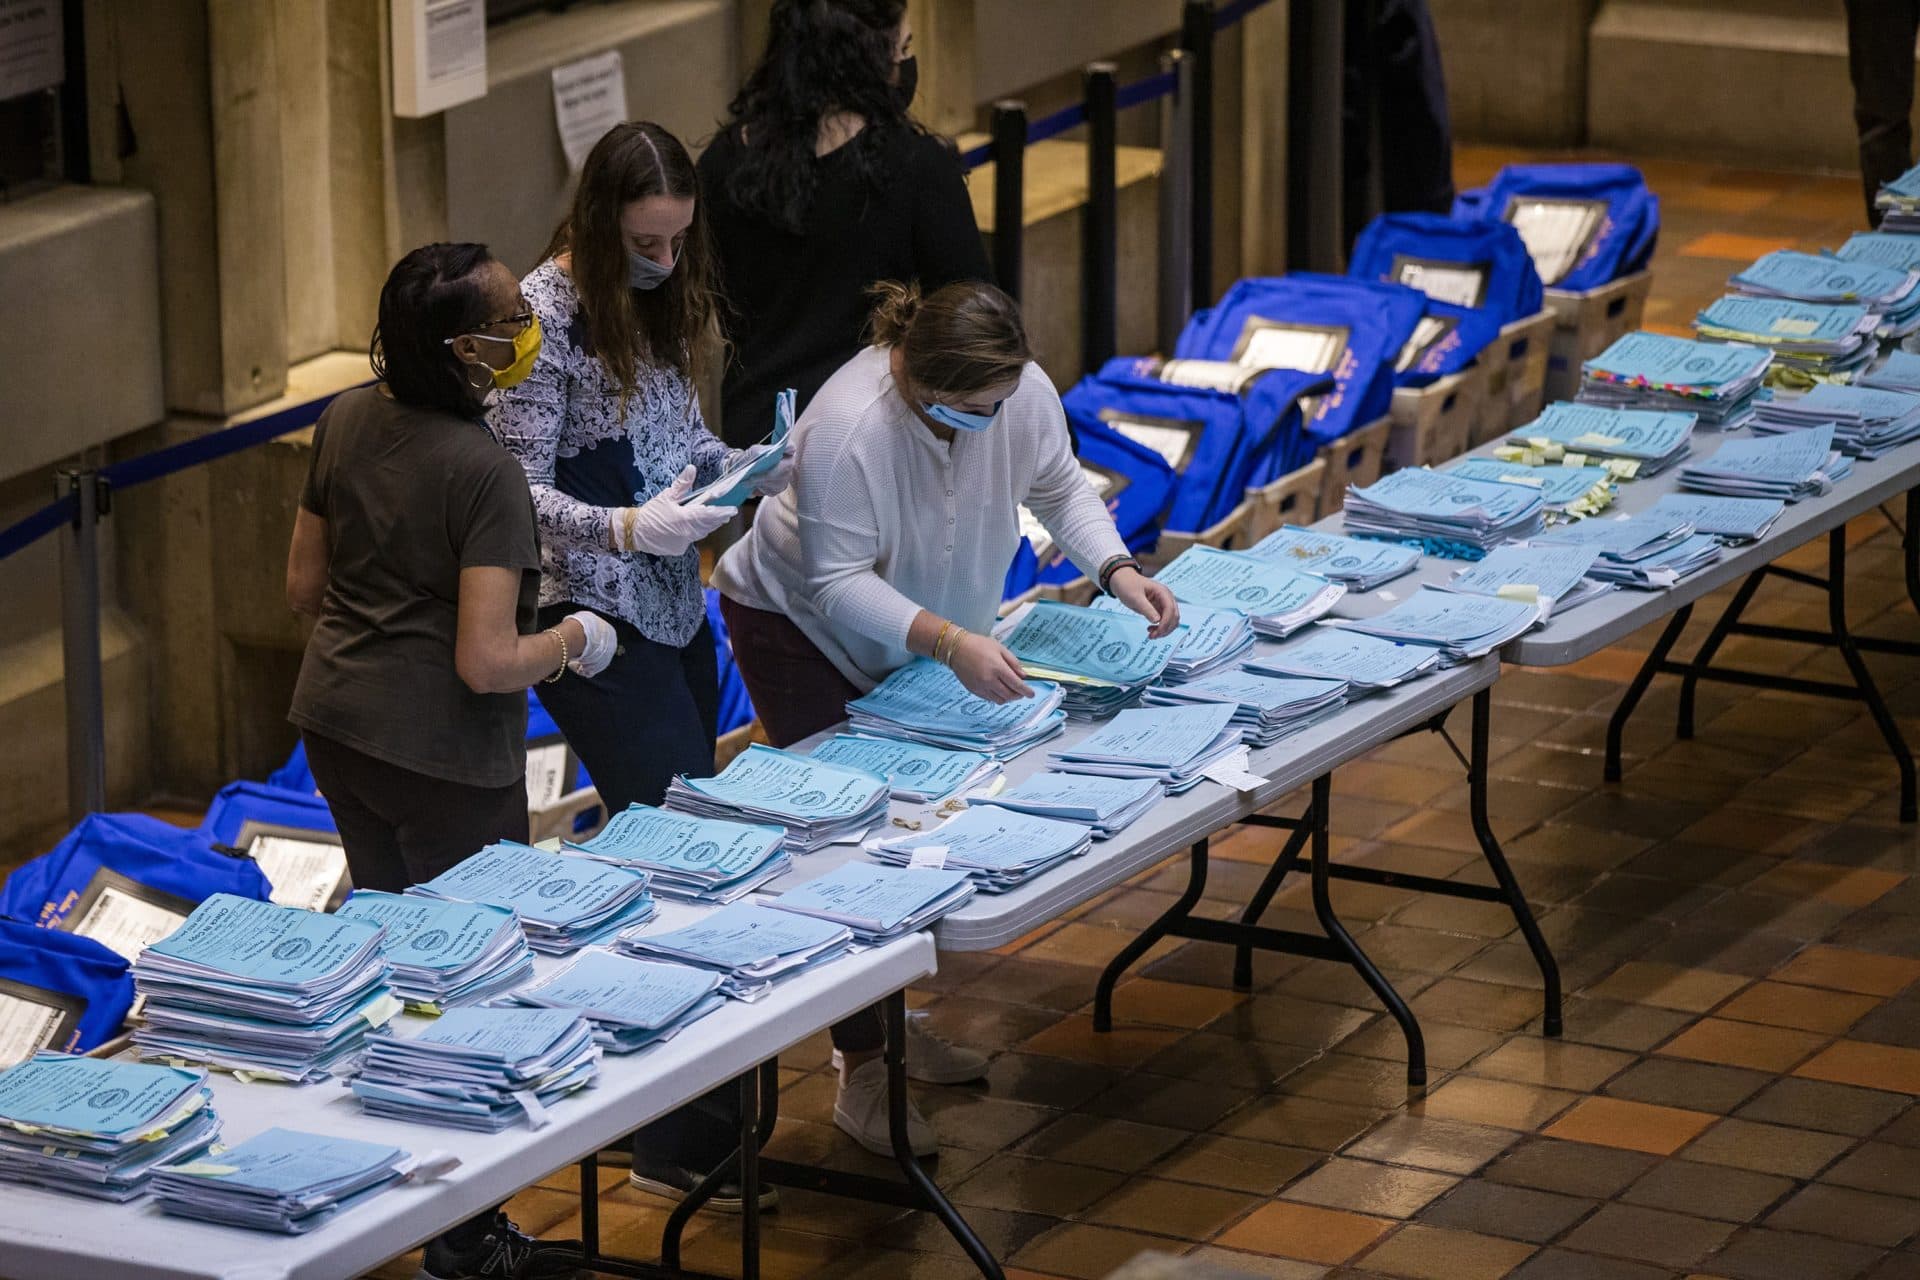 Election workers at Boston City Hall organize voting clerk’s notebooks. (Jesse Costa/WBUR)